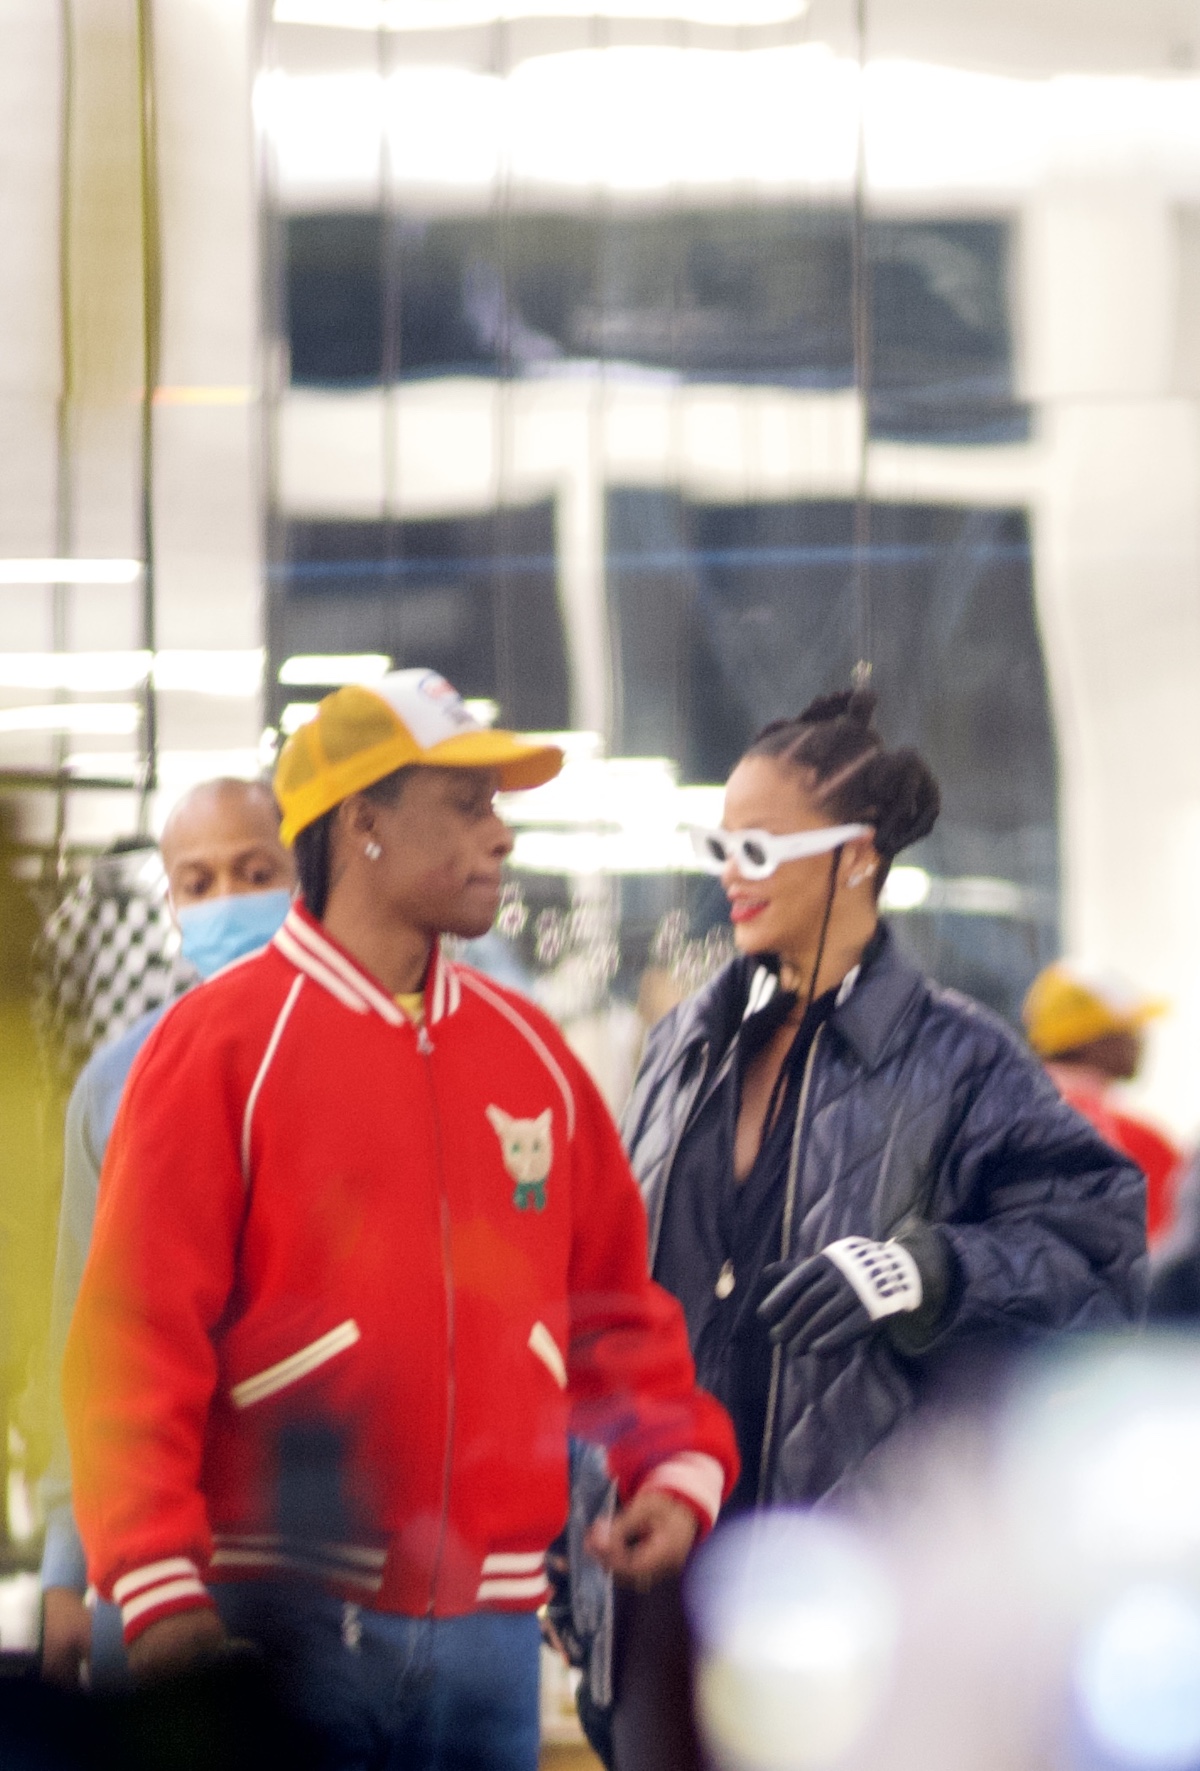 Rihanna and A$AP Rocky Shopping in Track Gear in New York